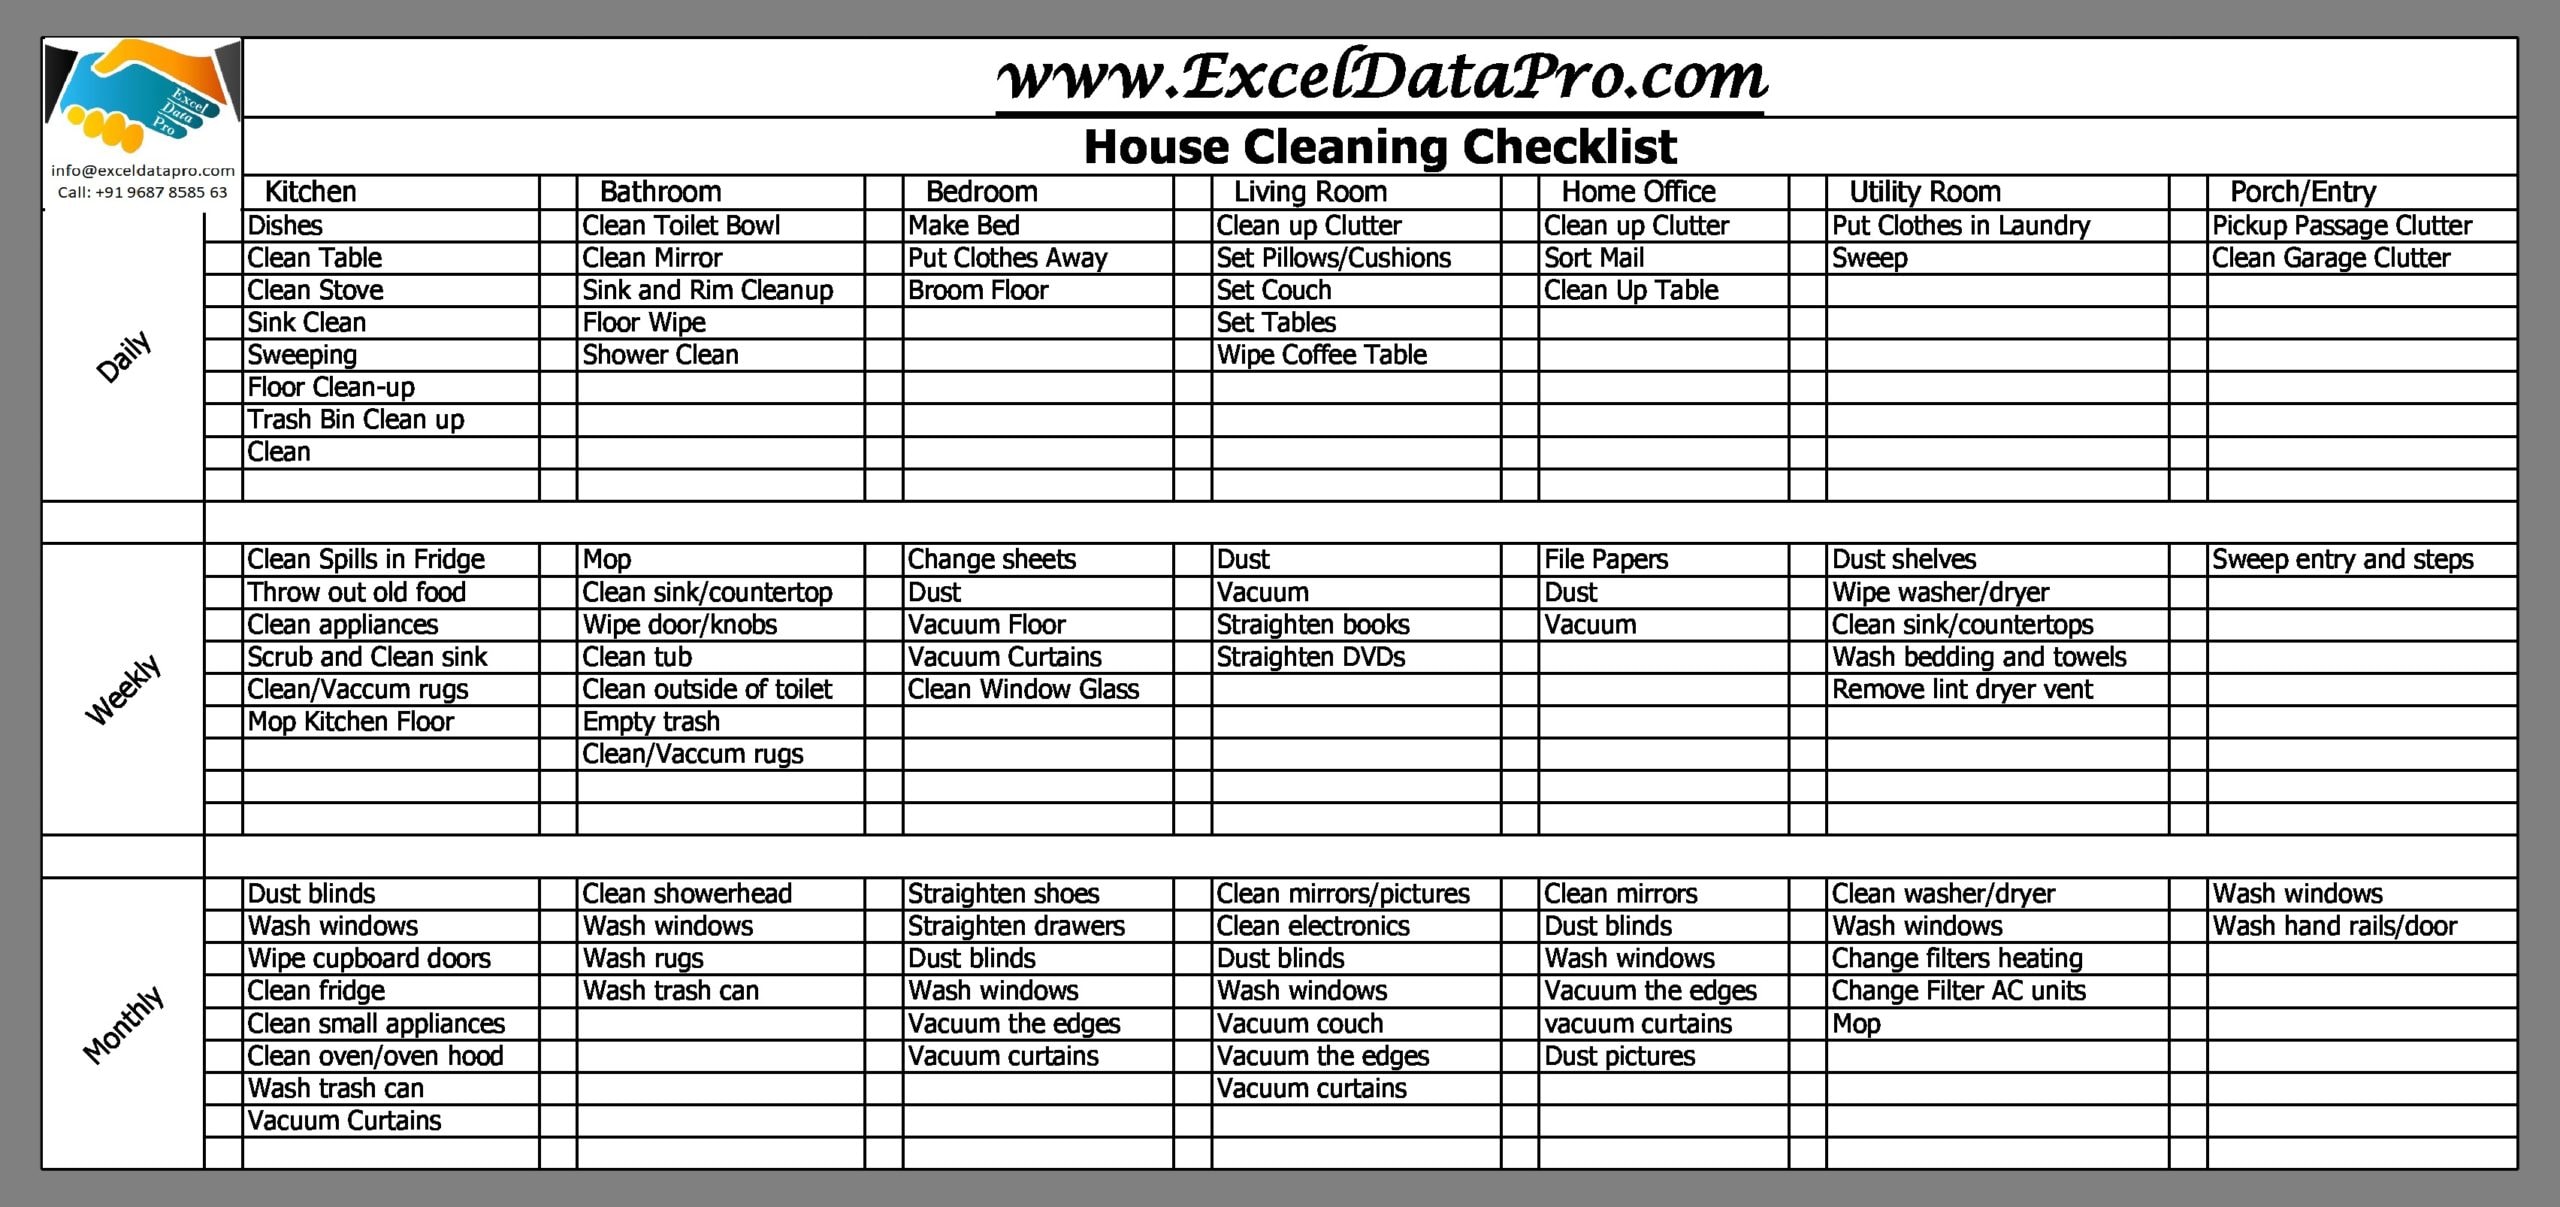 Daily House Cleaning Schedule Template Jamas The Olvidare